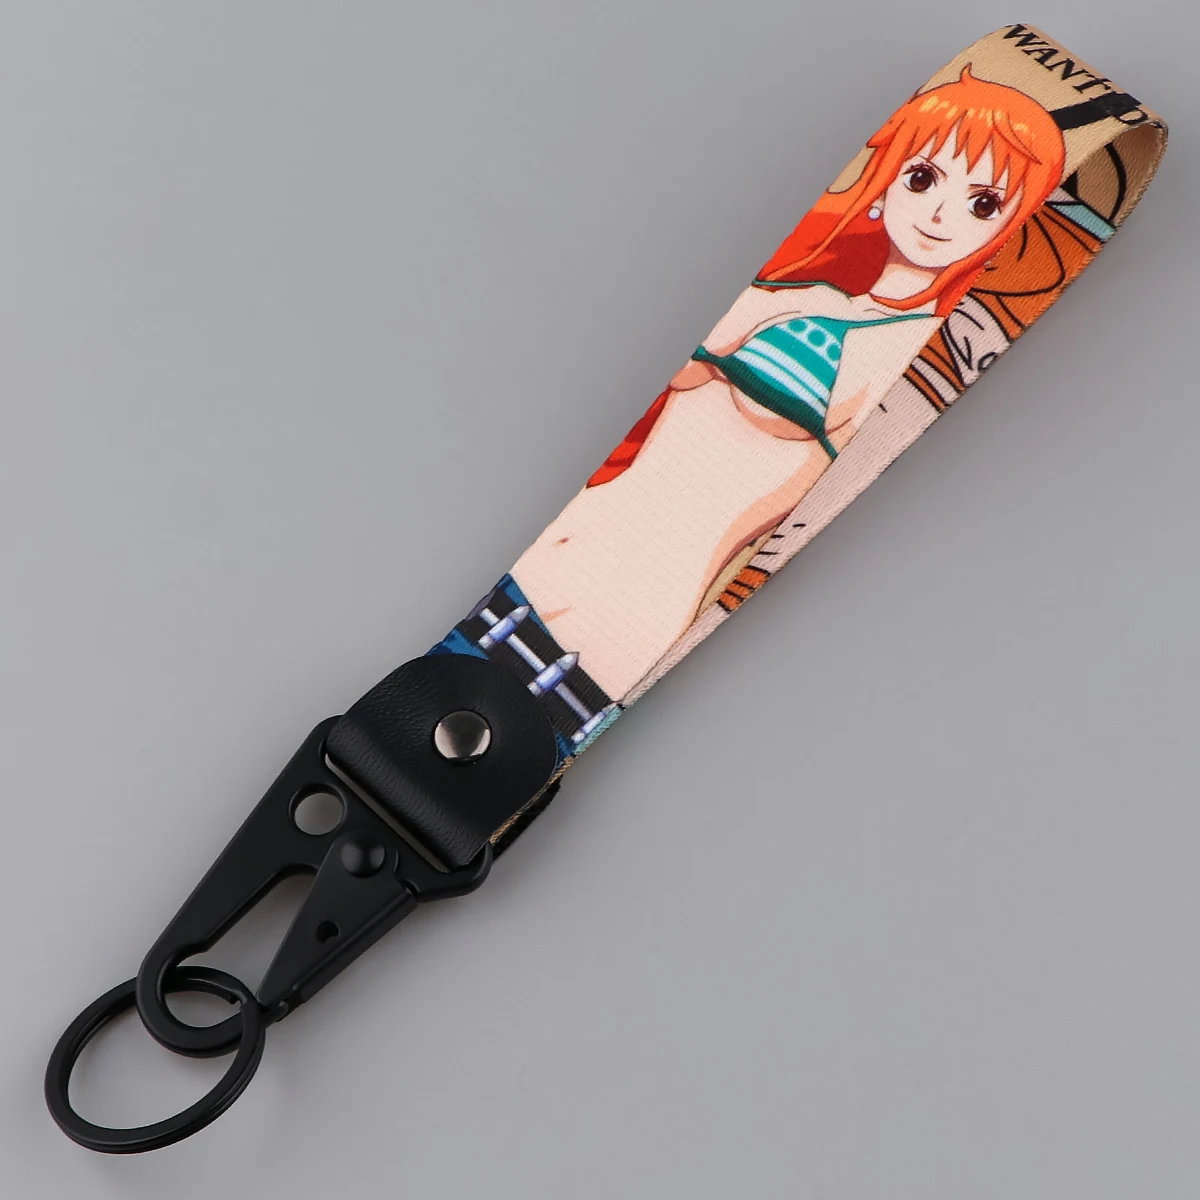 ONE PIECE Anime Cool Key Tag Key Chain for Motorcycles and Cars Decorative Key Fobs Holder Key Ring Accessories Gifts